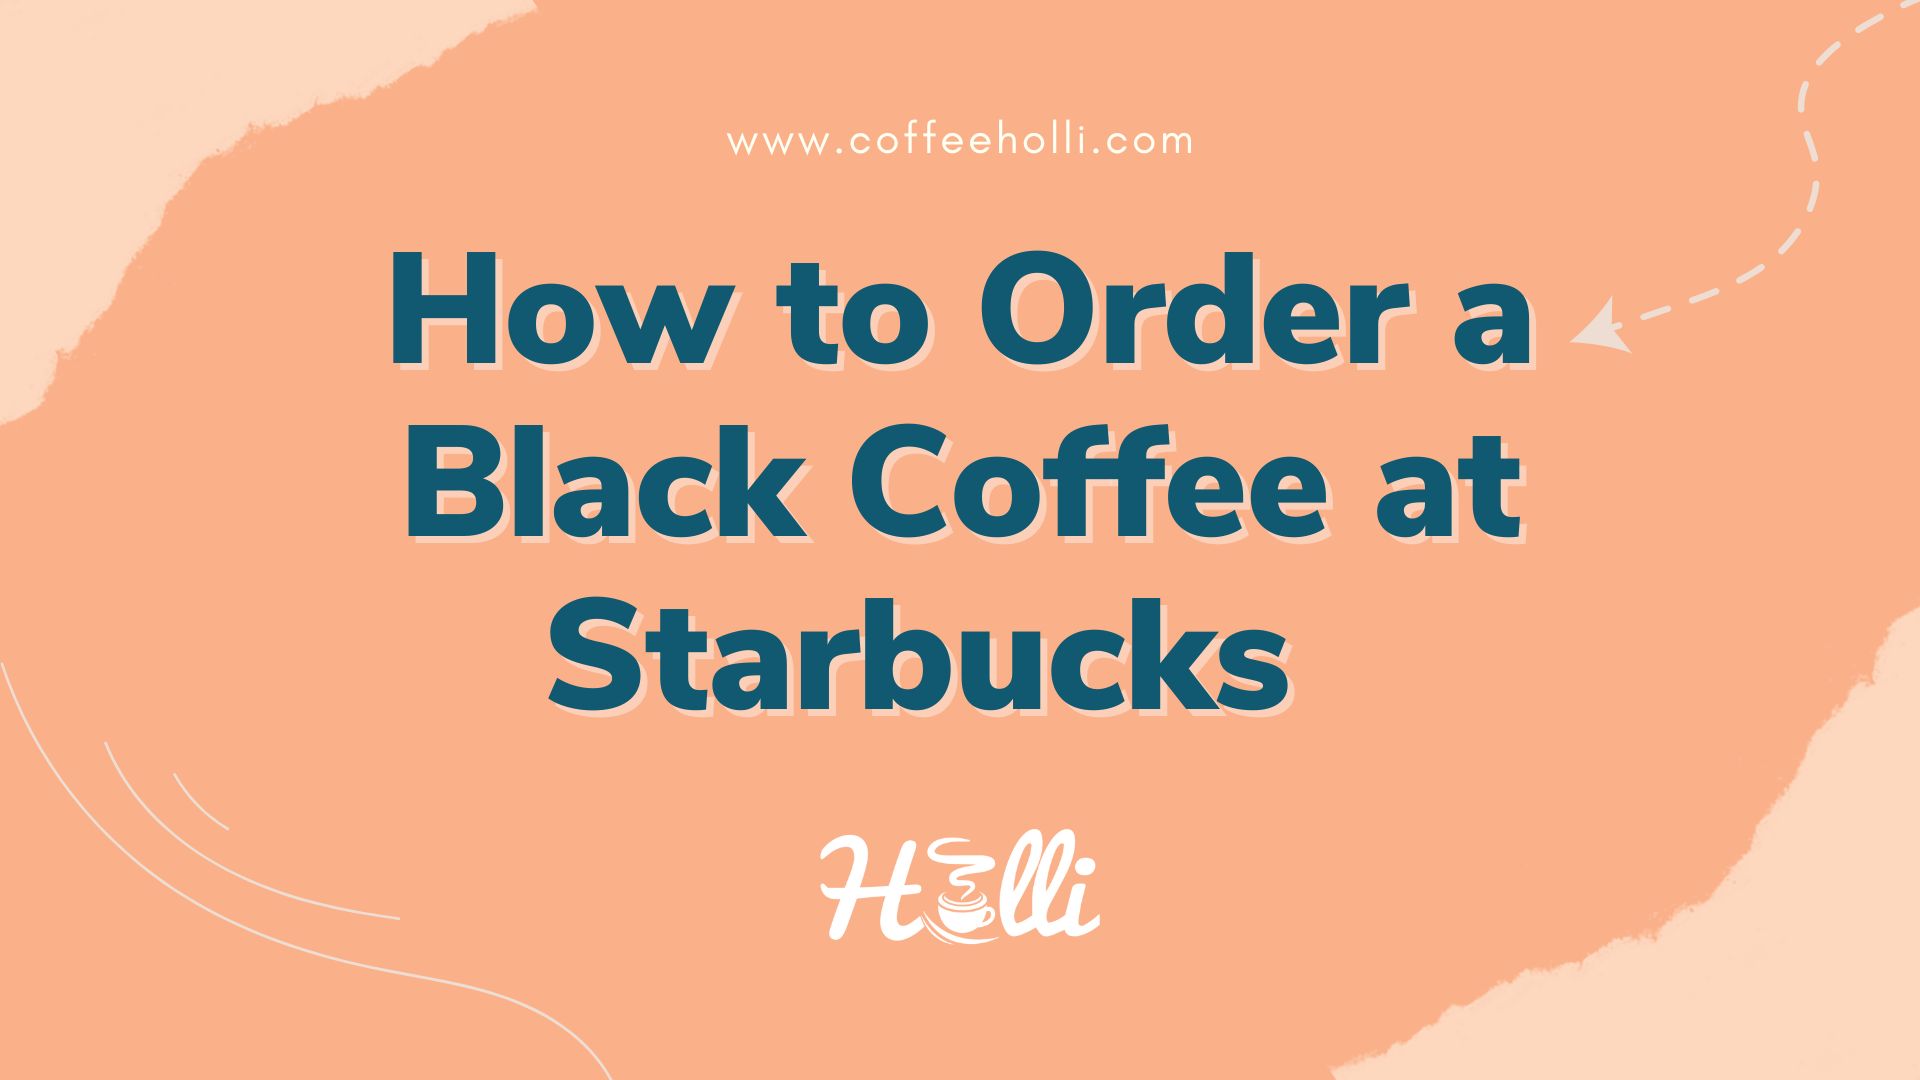 How to Order a Black Coffee at Starbucks